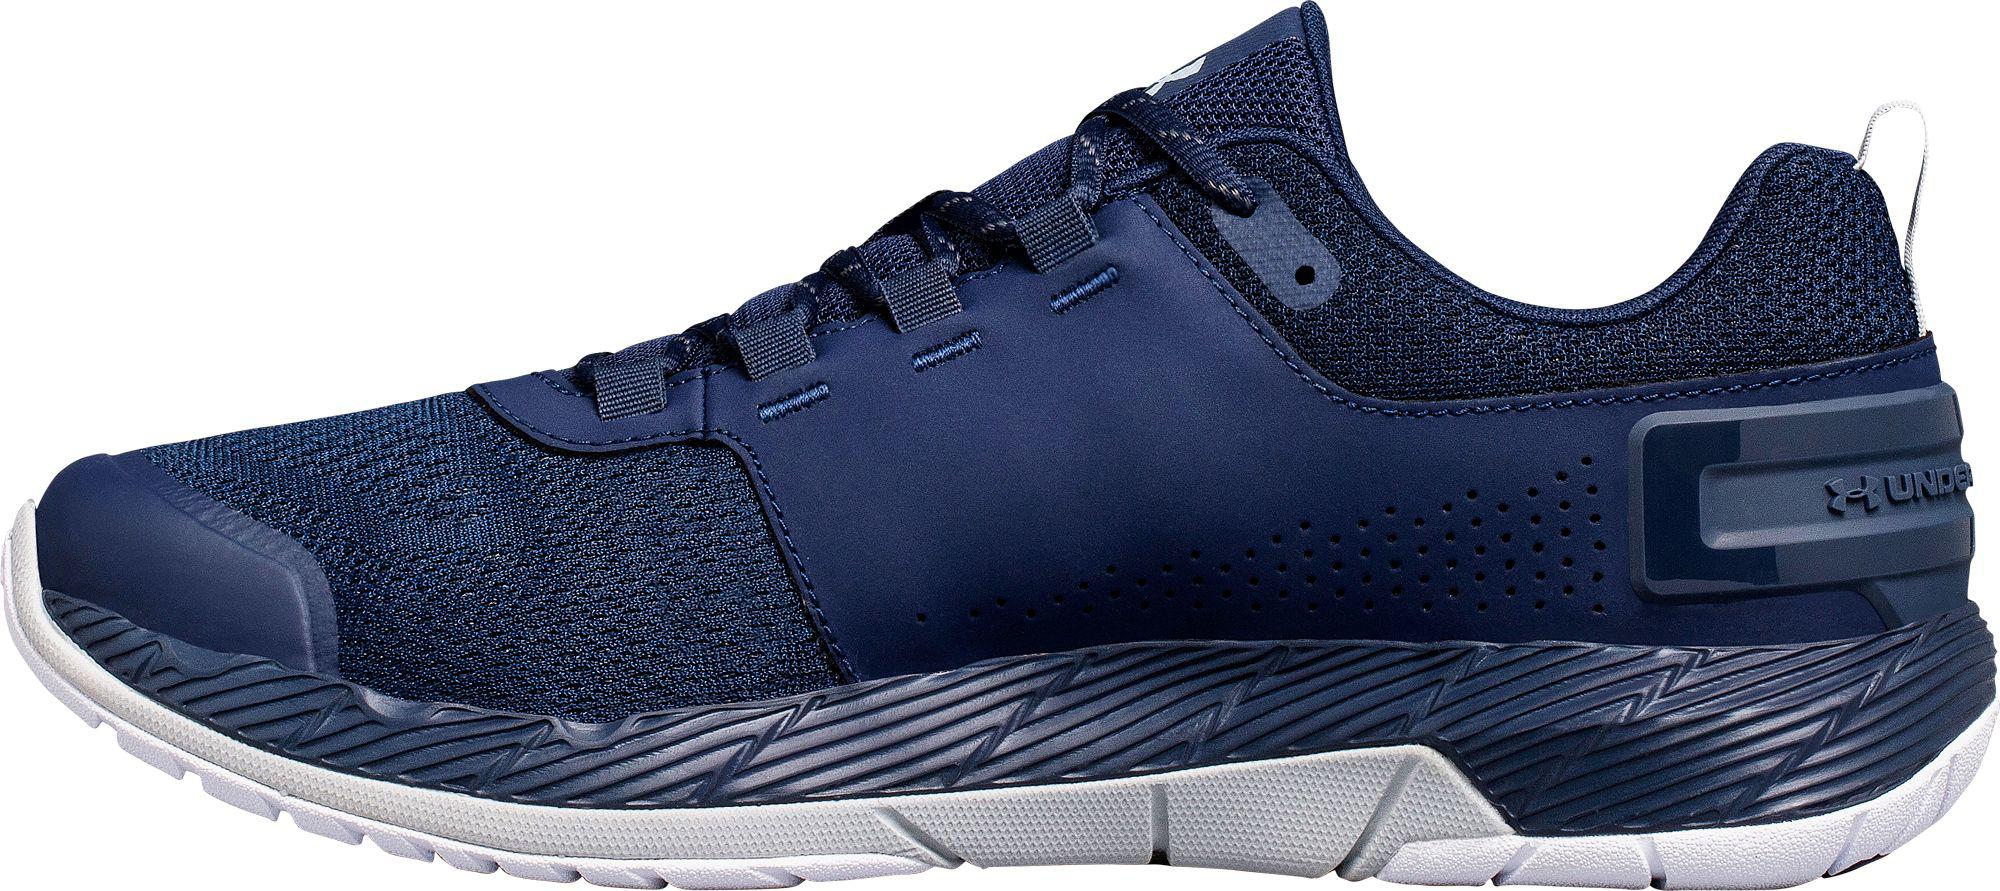 Under Armour Leather Commit Tr Ex Cross Trainer Sneaker in Navy (Blue ...